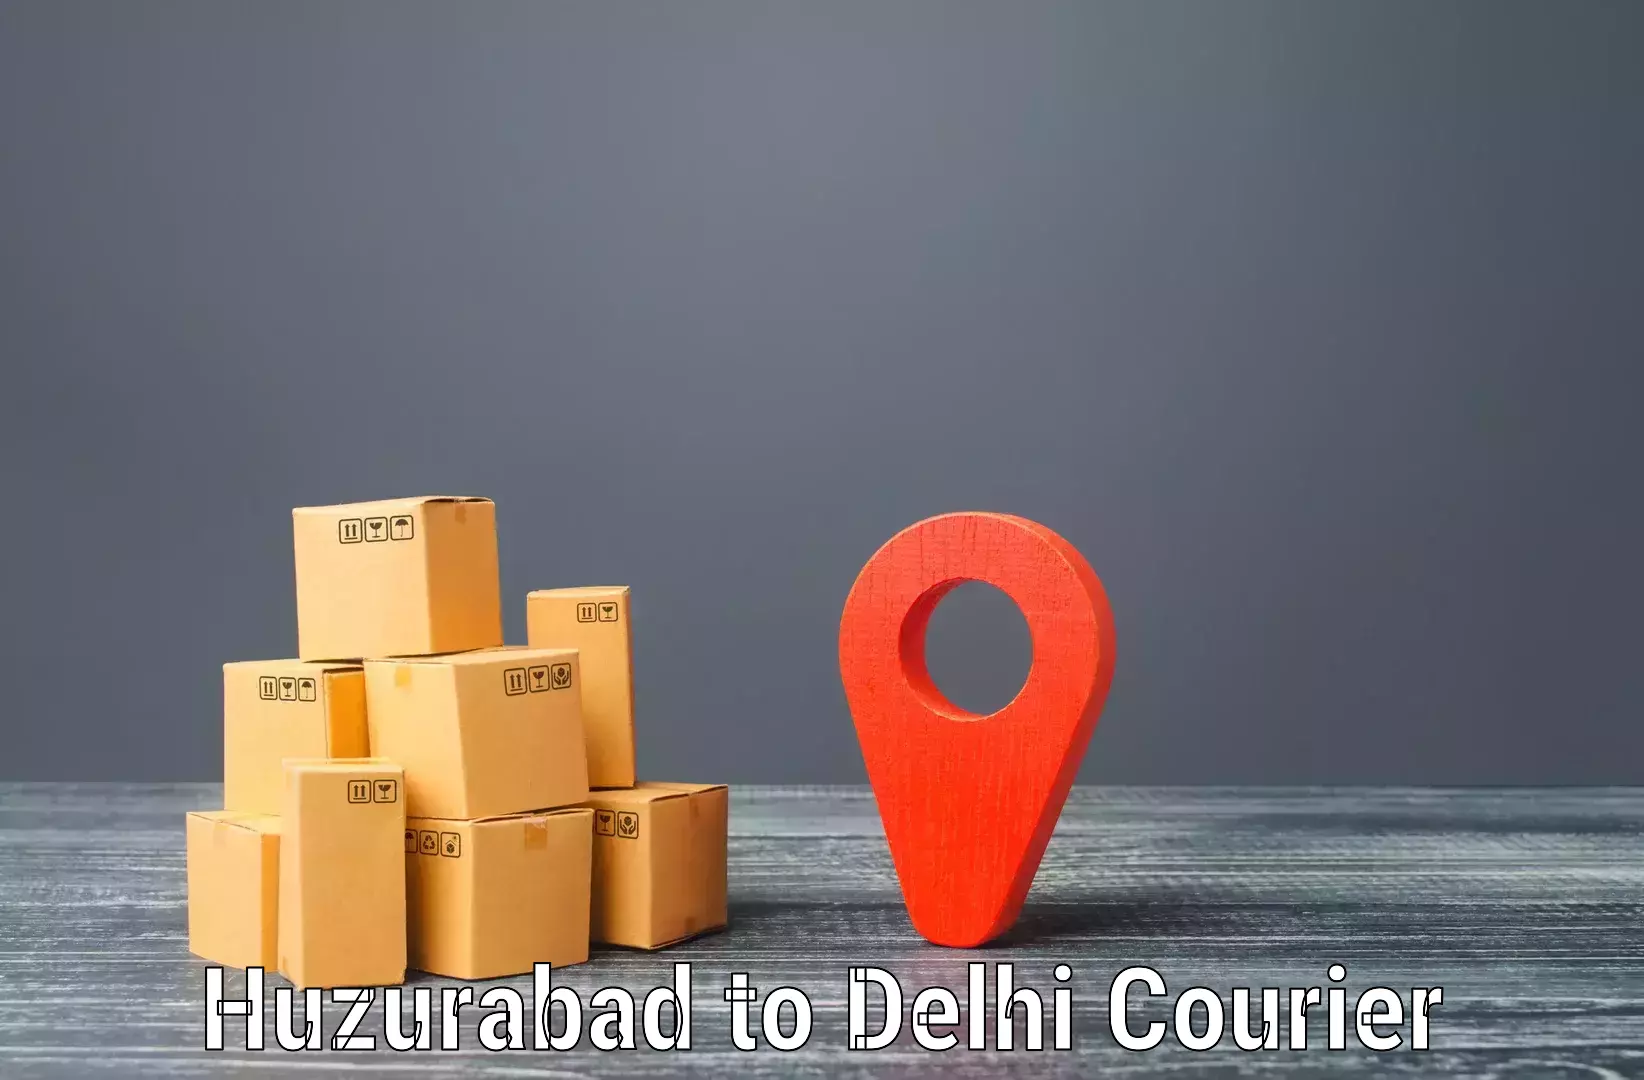 Quality courier partnerships Huzurabad to Lodhi Road